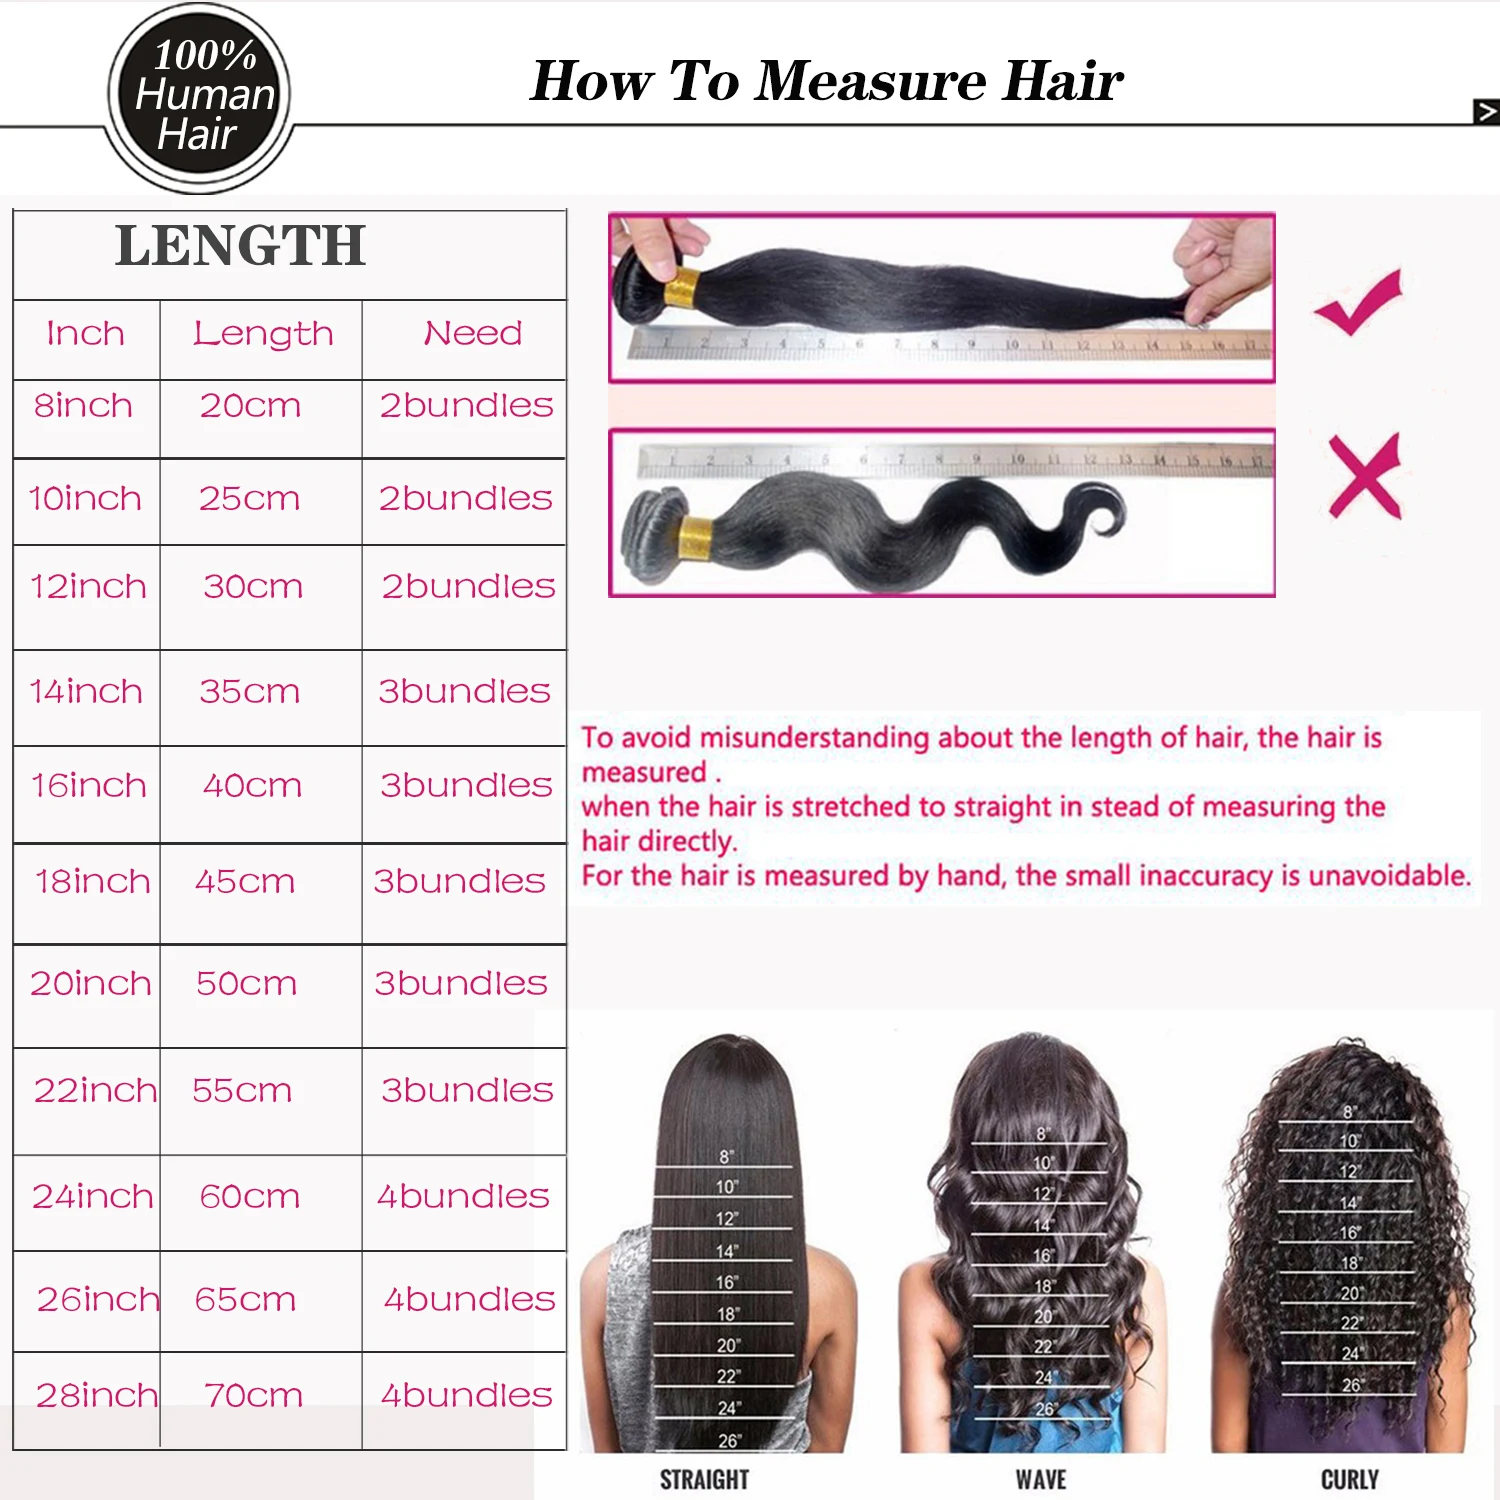 How to Measure Hair.